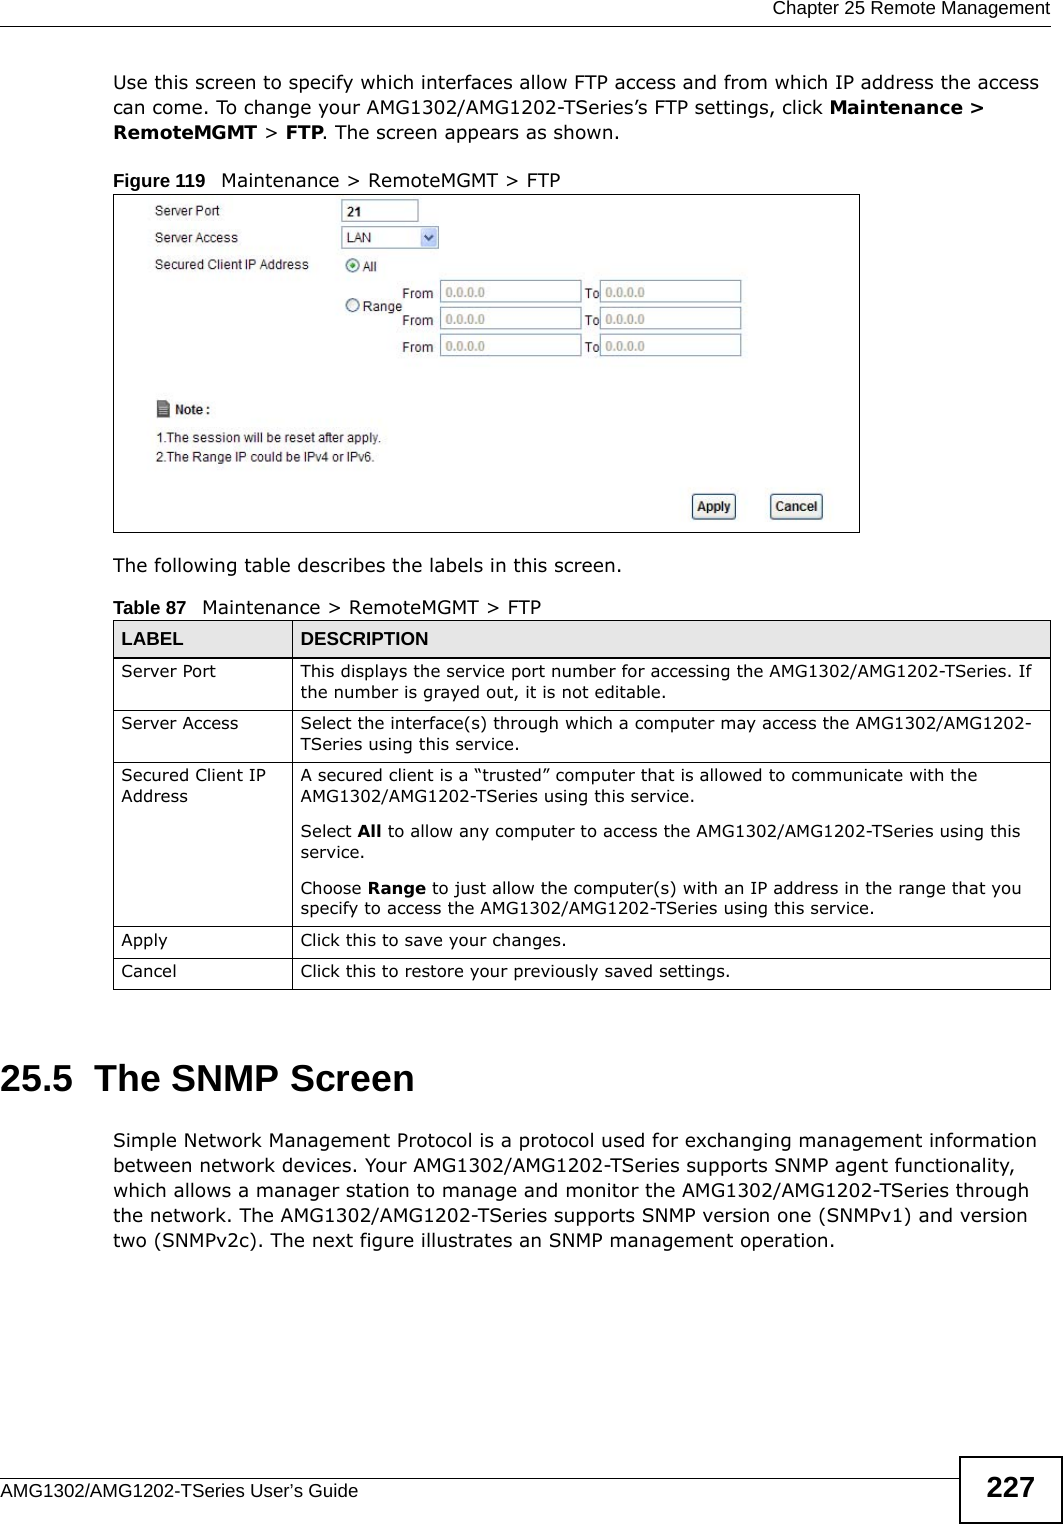  Chapter 25 Remote ManagementAMG1302/AMG1202-TSeries User’s Guide 227Use this screen to specify which interfaces allow FTP access and from which IP address the access can come. To change your AMG1302/AMG1202-TSeries’s FTP settings, click Maintenance &gt; RemoteMGMT &gt; FTP. The screen appears as shown.Figure 119   Maintenance &gt; RemoteMGMT &gt; FTPThe following table describes the labels in this screen. 25.5  The SNMP ScreenSimple Network Management Protocol is a protocol used for exchanging management information between network devices. Your AMG1302/AMG1202-TSeries supports SNMP agent functionality, which allows a manager station to manage and monitor the AMG1302/AMG1202-TSeries through the network. The AMG1302/AMG1202-TSeries supports SNMP version one (SNMPv1) and version two (SNMPv2c). The next figure illustrates an SNMP management operation.Table 87   Maintenance &gt; RemoteMGMT &gt; FTPLABEL DESCRIPTIONServer Port This displays the service port number for accessing the AMG1302/AMG1202-TSeries. If the number is grayed out, it is not editable.Server Access Select the interface(s) through which a computer may access the AMG1302/AMG1202-TSeries using this service.Secured Client IP AddressA secured client is a “trusted” computer that is allowed to communicate with the AMG1302/AMG1202-TSeries using this service. Select All to allow any computer to access the AMG1302/AMG1202-TSeries using this service.Choose Range to just allow the computer(s) with an IP address in the range that you specify to access the AMG1302/AMG1202-TSeries using this service.Apply Click this to save your changes.Cancel Click this to restore your previously saved settings.